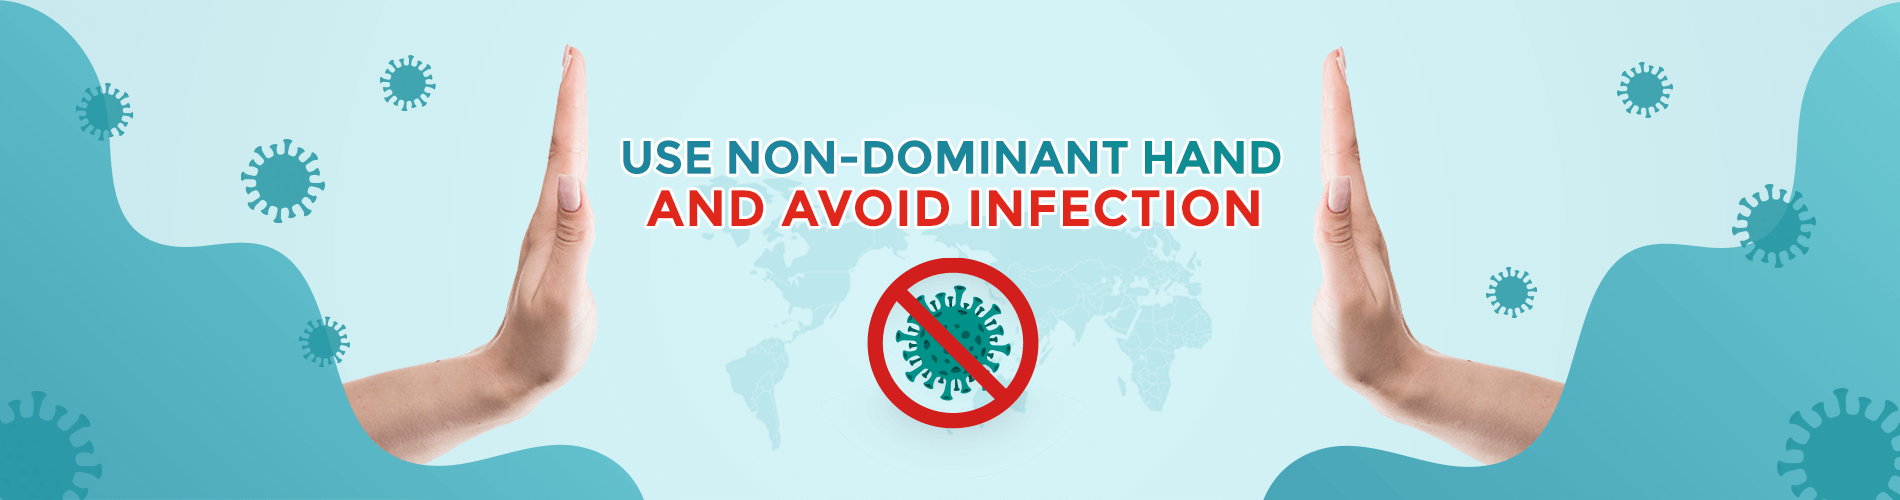 Use Non-Dominant Hand & Avoid Infection